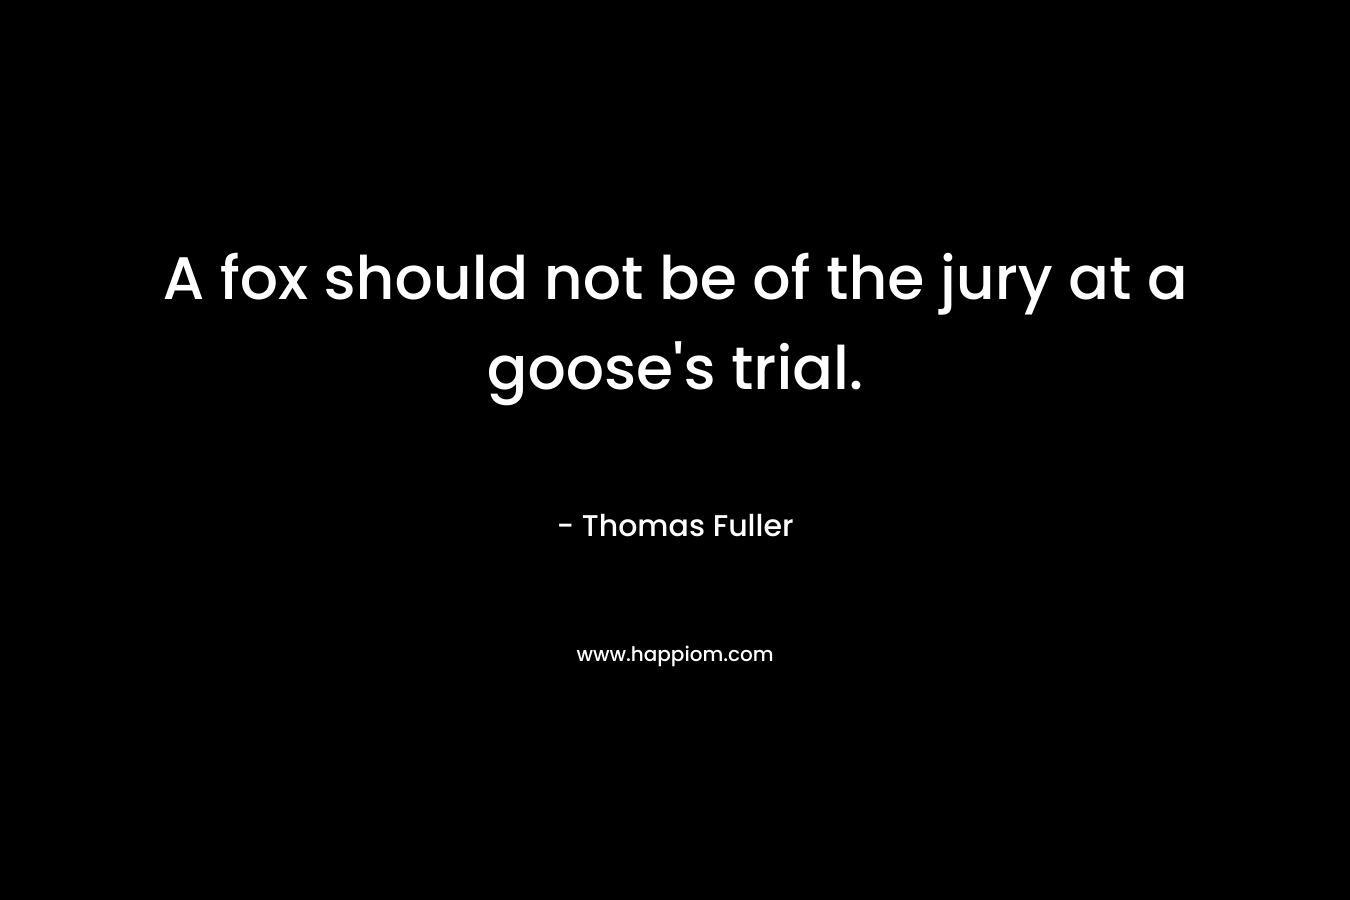 A fox should not be of the jury at a goose’s trial. – Thomas Fuller